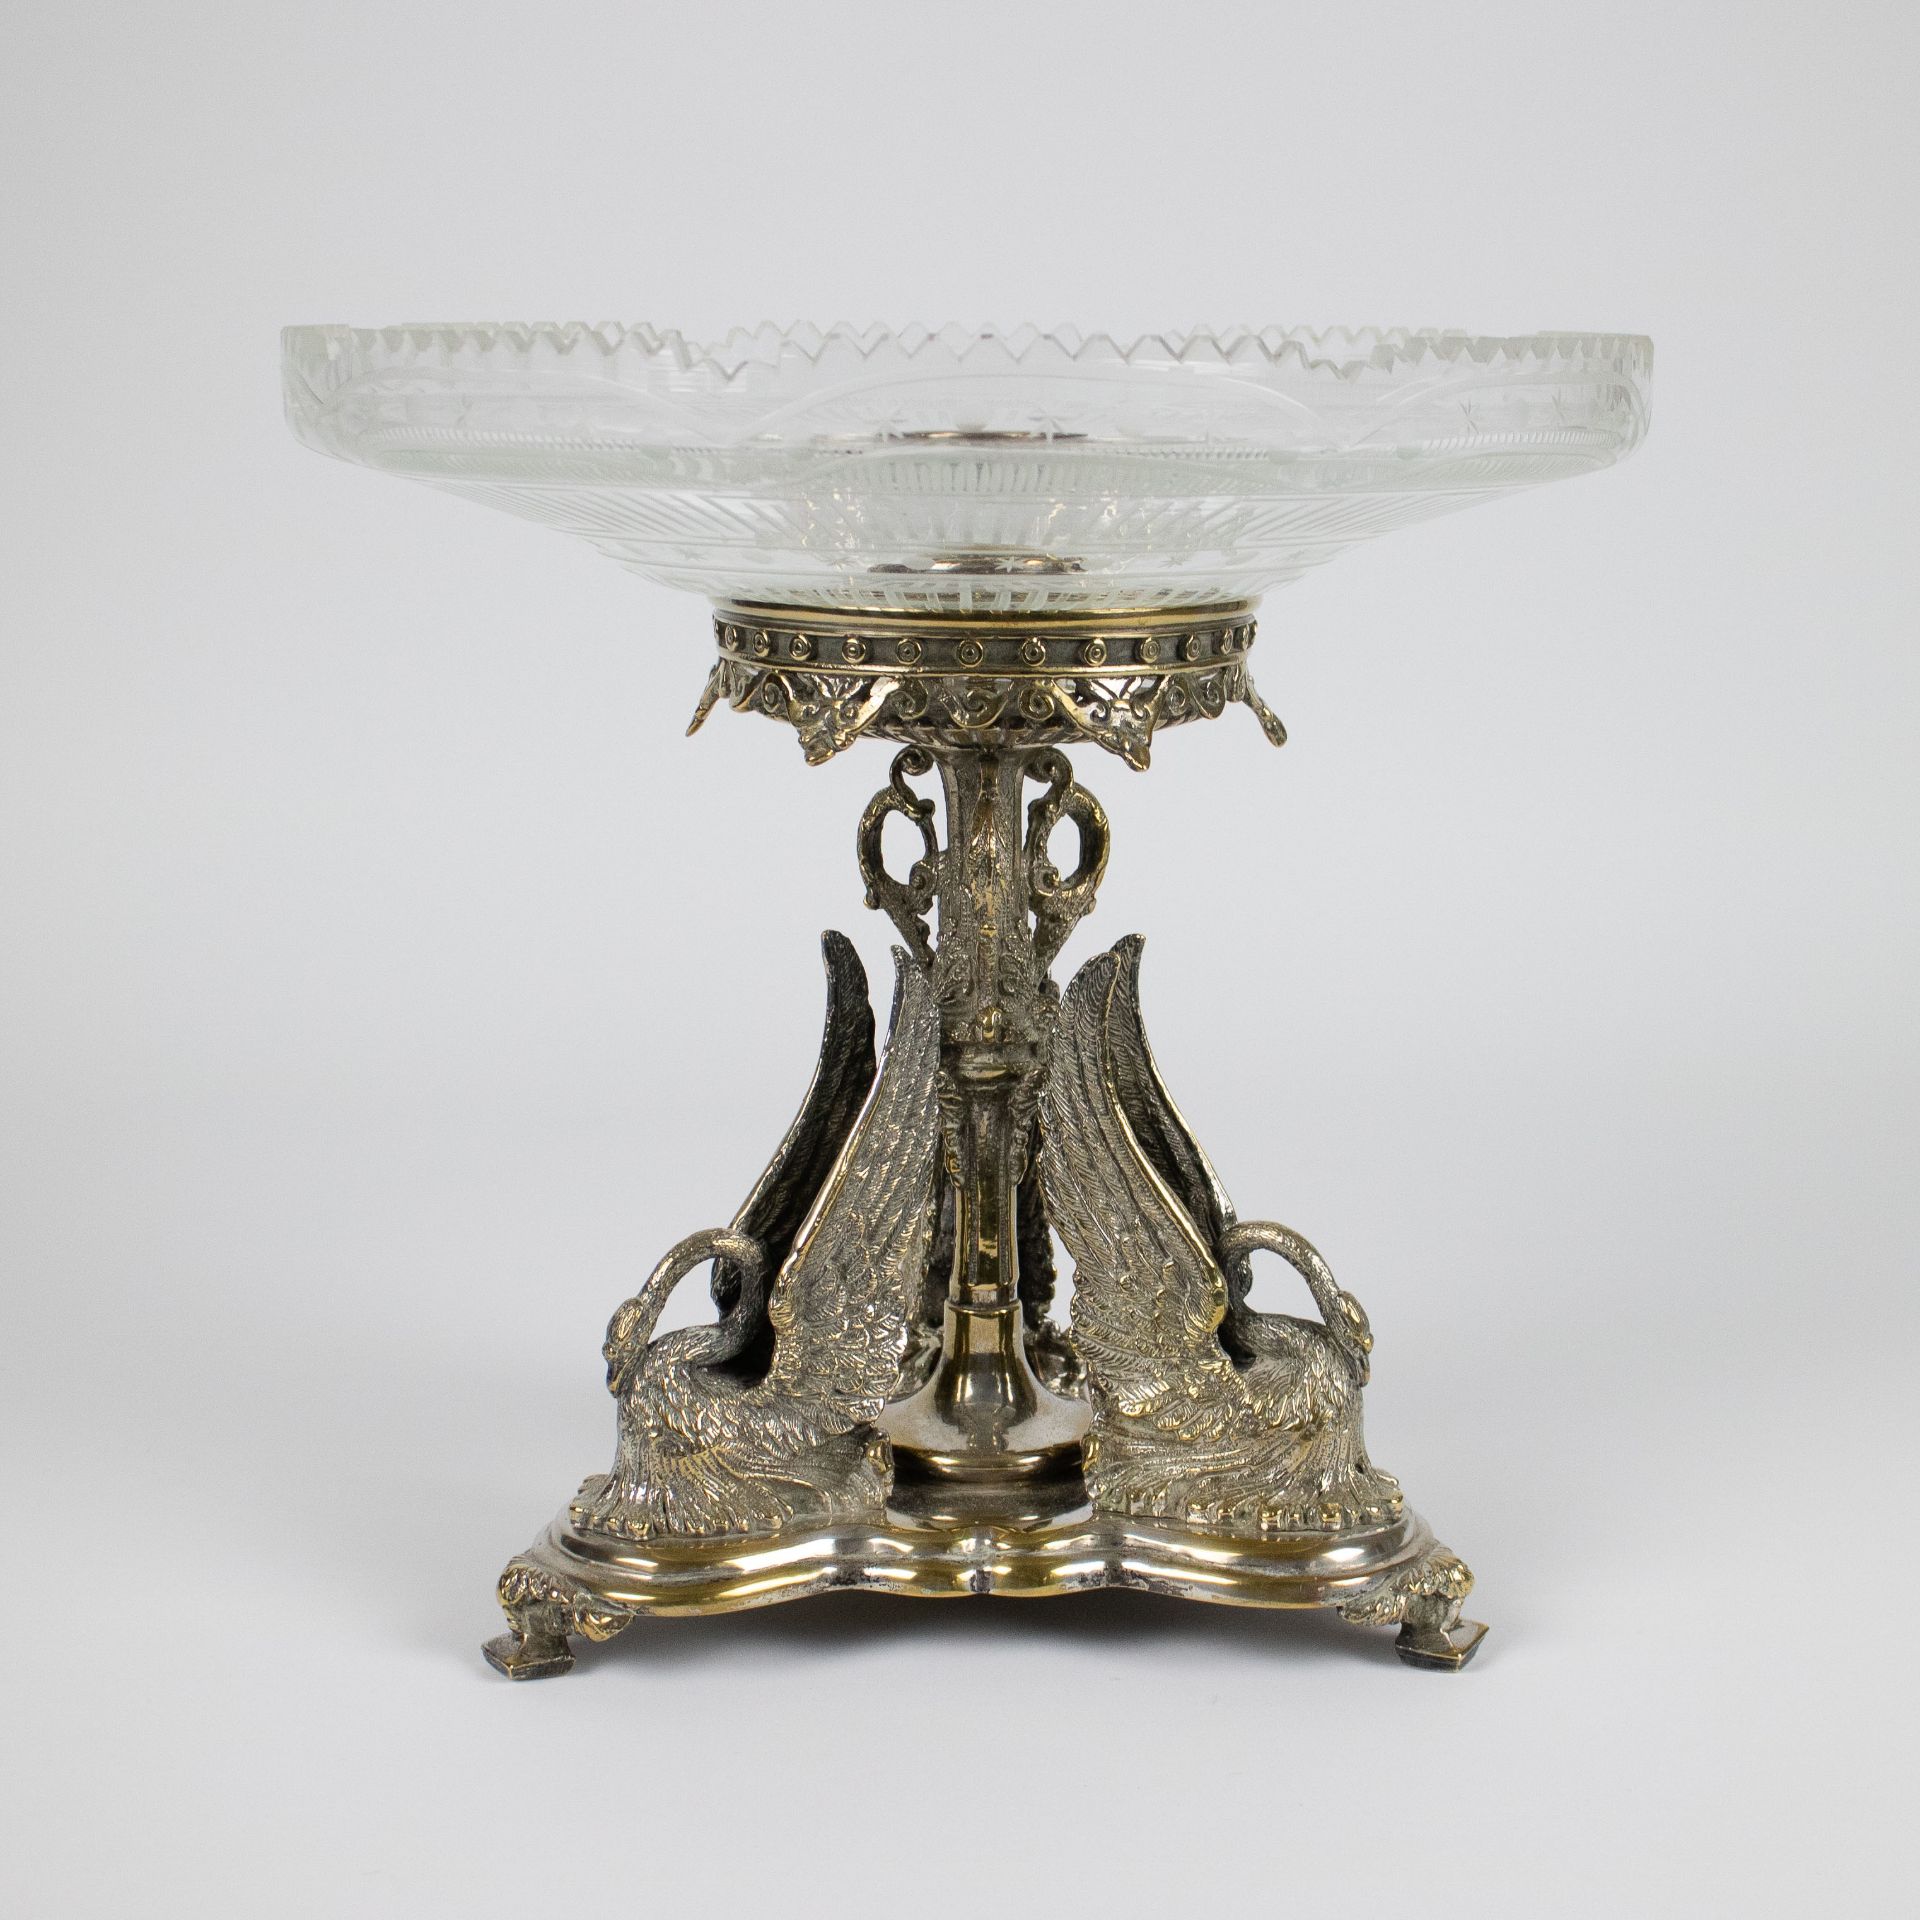 Centerpiece silver plated English with crystal bowl circa 1880 - Image 2 of 6